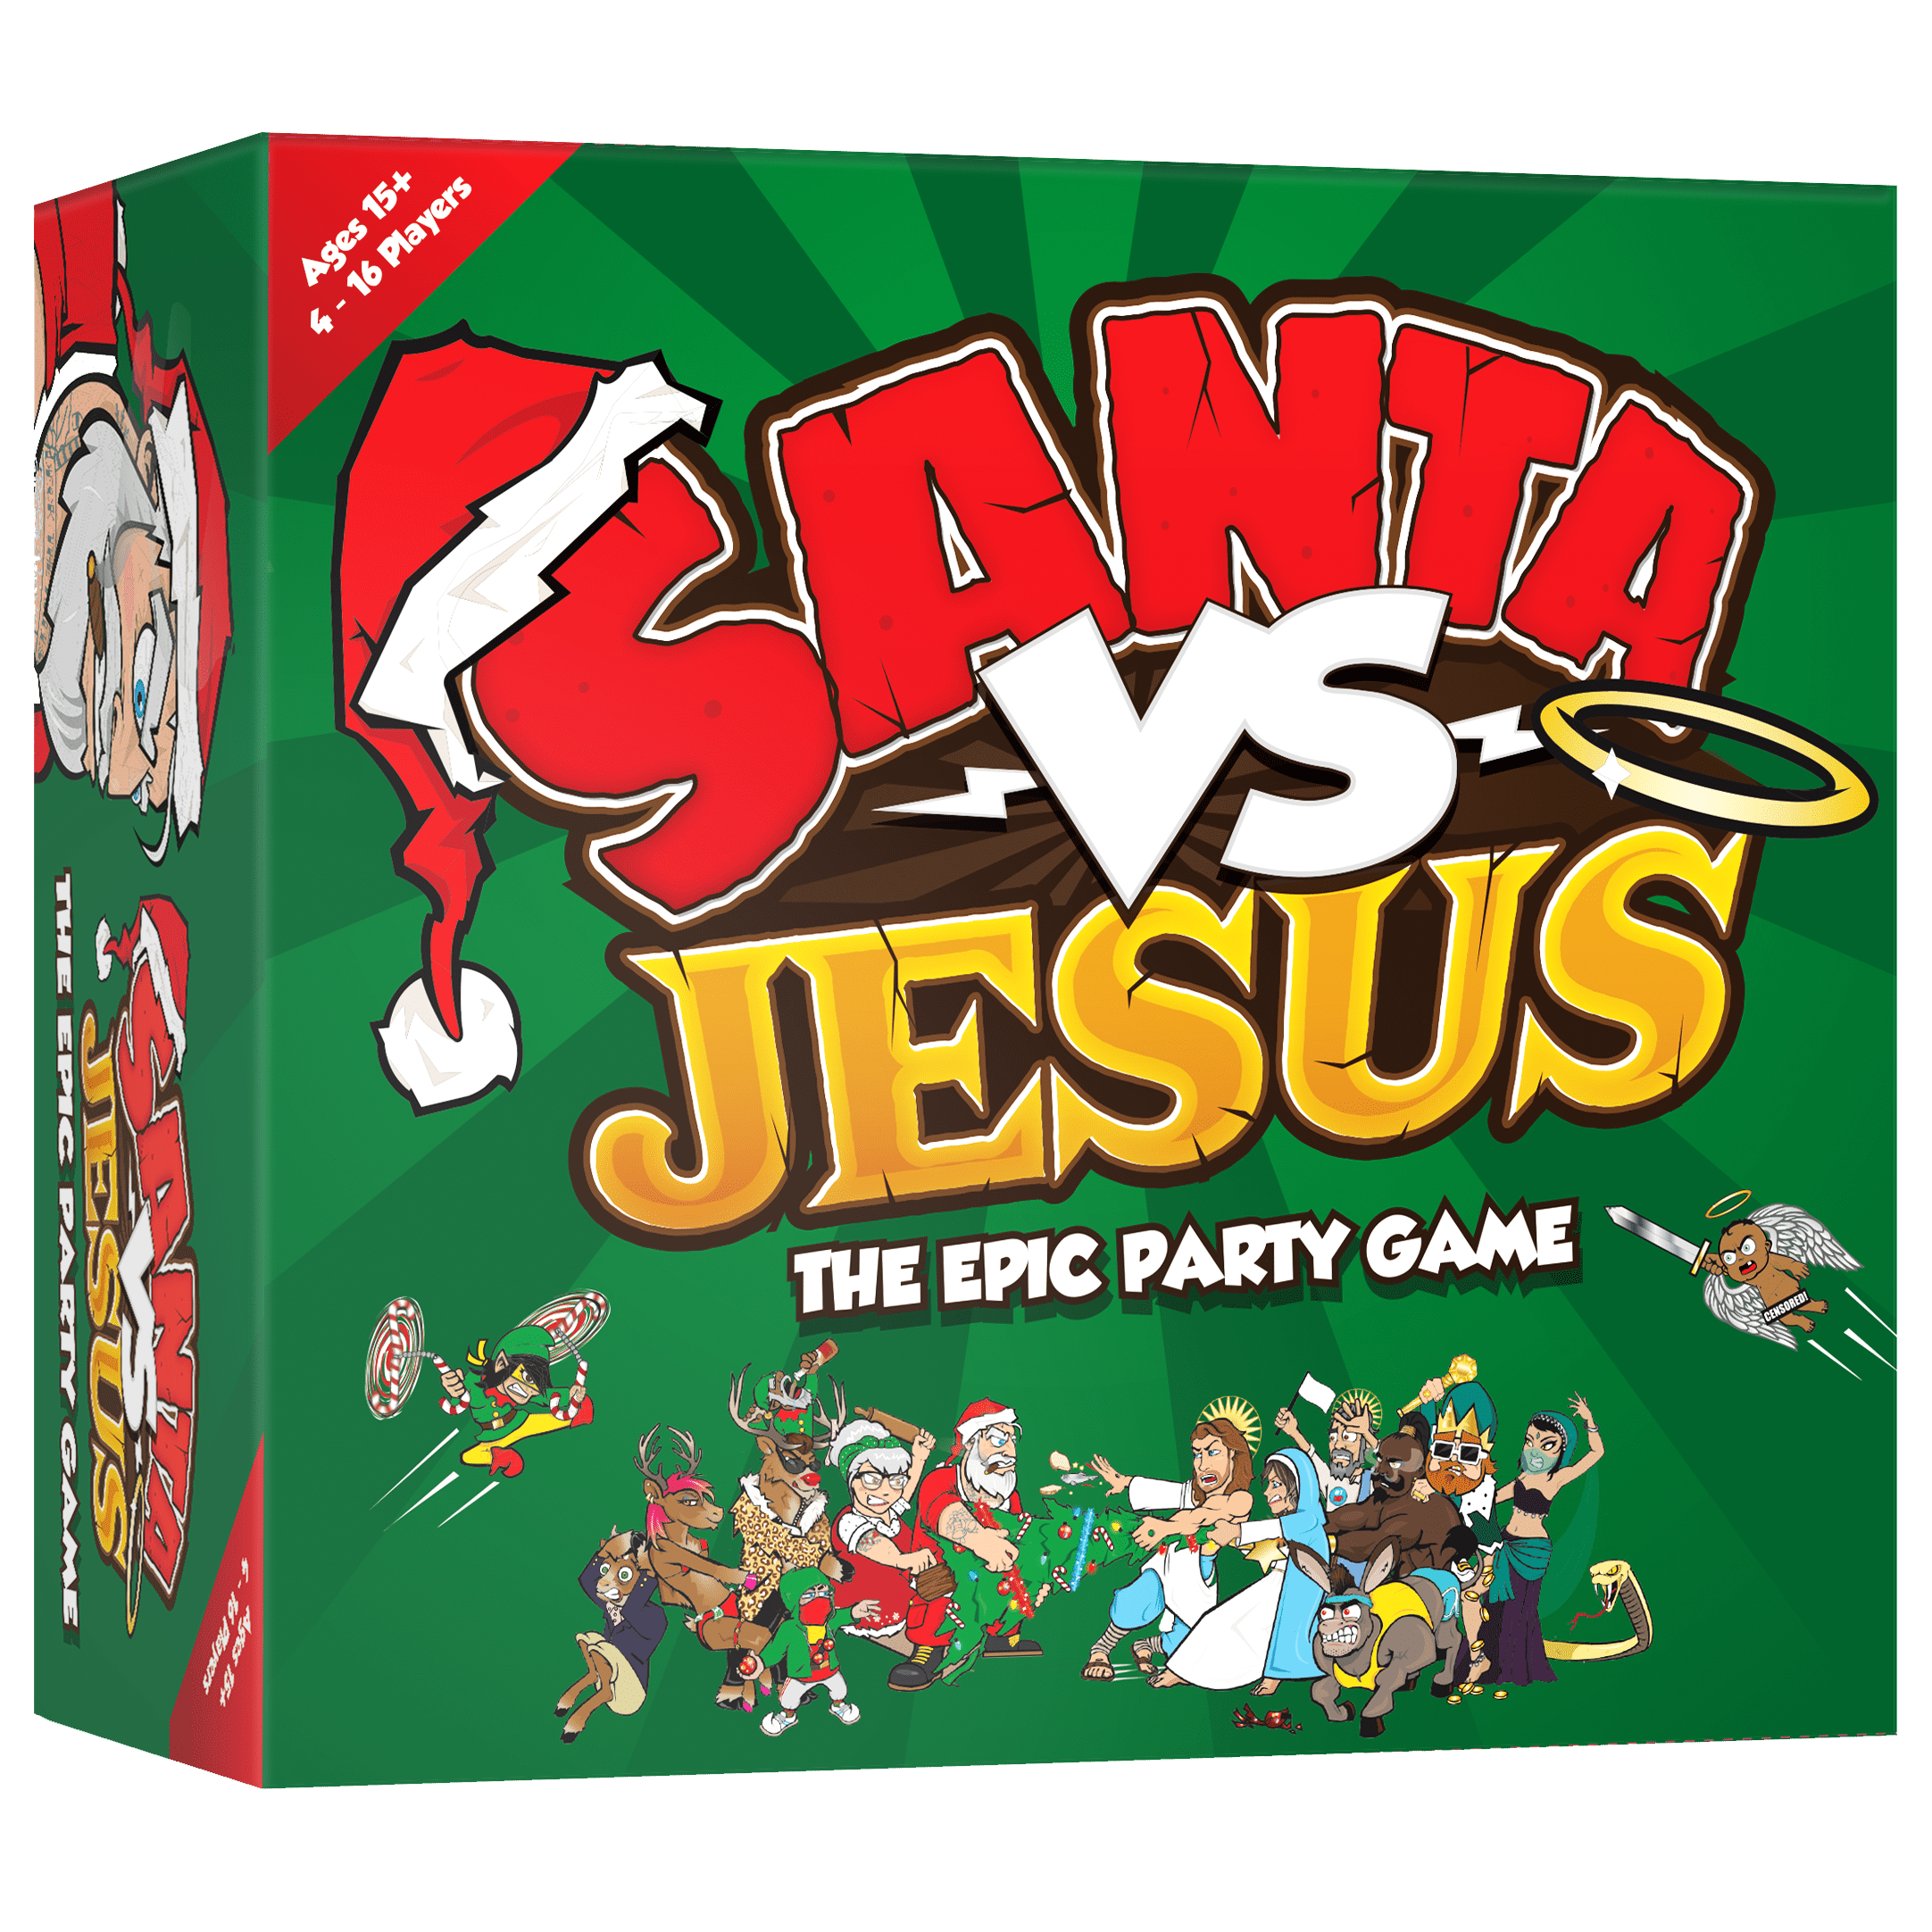 Santa, The Epic Christmas Party Game